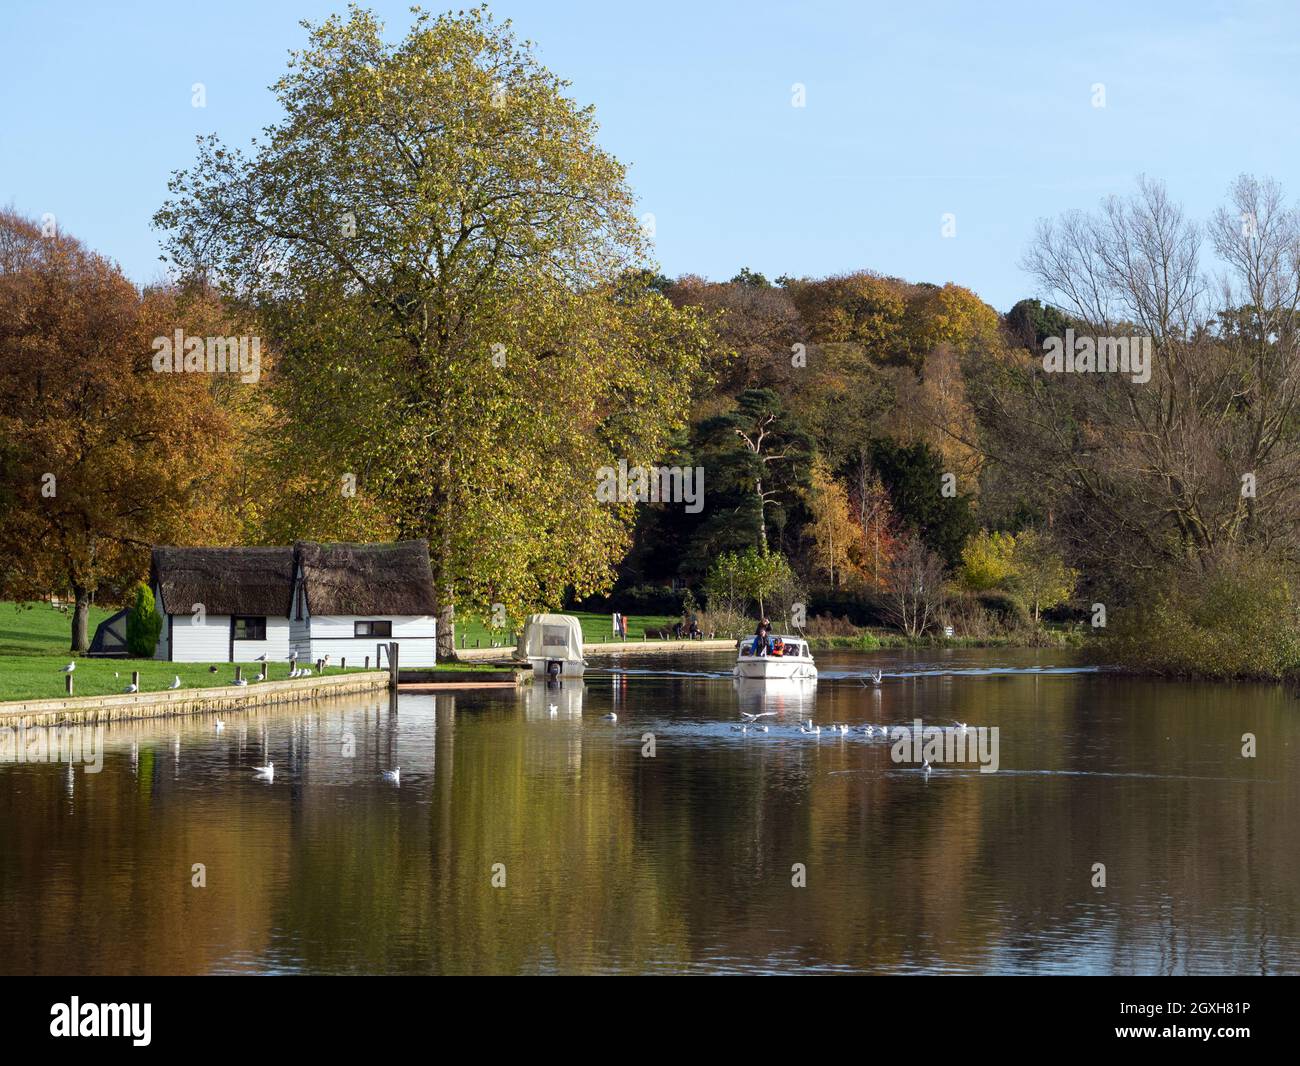 The Norfolk Broads in Autumn on The River Bure at Picturesque Coltishall Common, Coltishall, Norfolk, England, UK Stock Photo